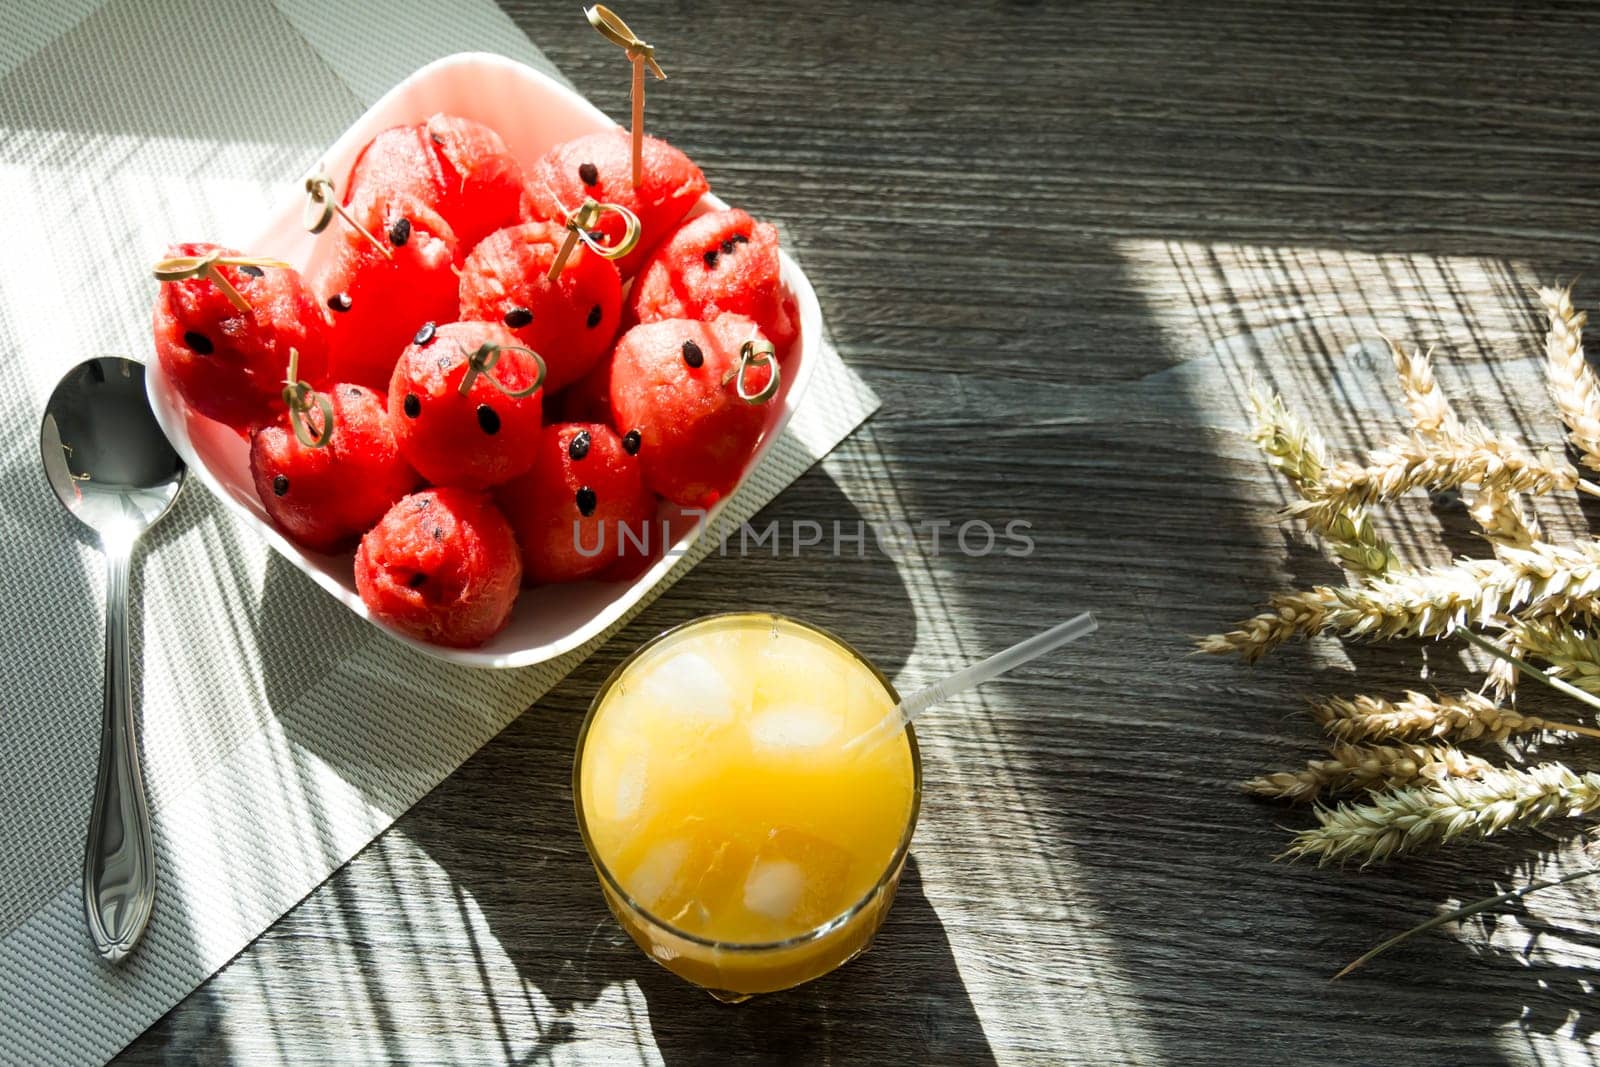 Freshly squeezed orange juice, sweet watermelon dessert and spikelets of ripe wheat on a wooden table in the sunlight.